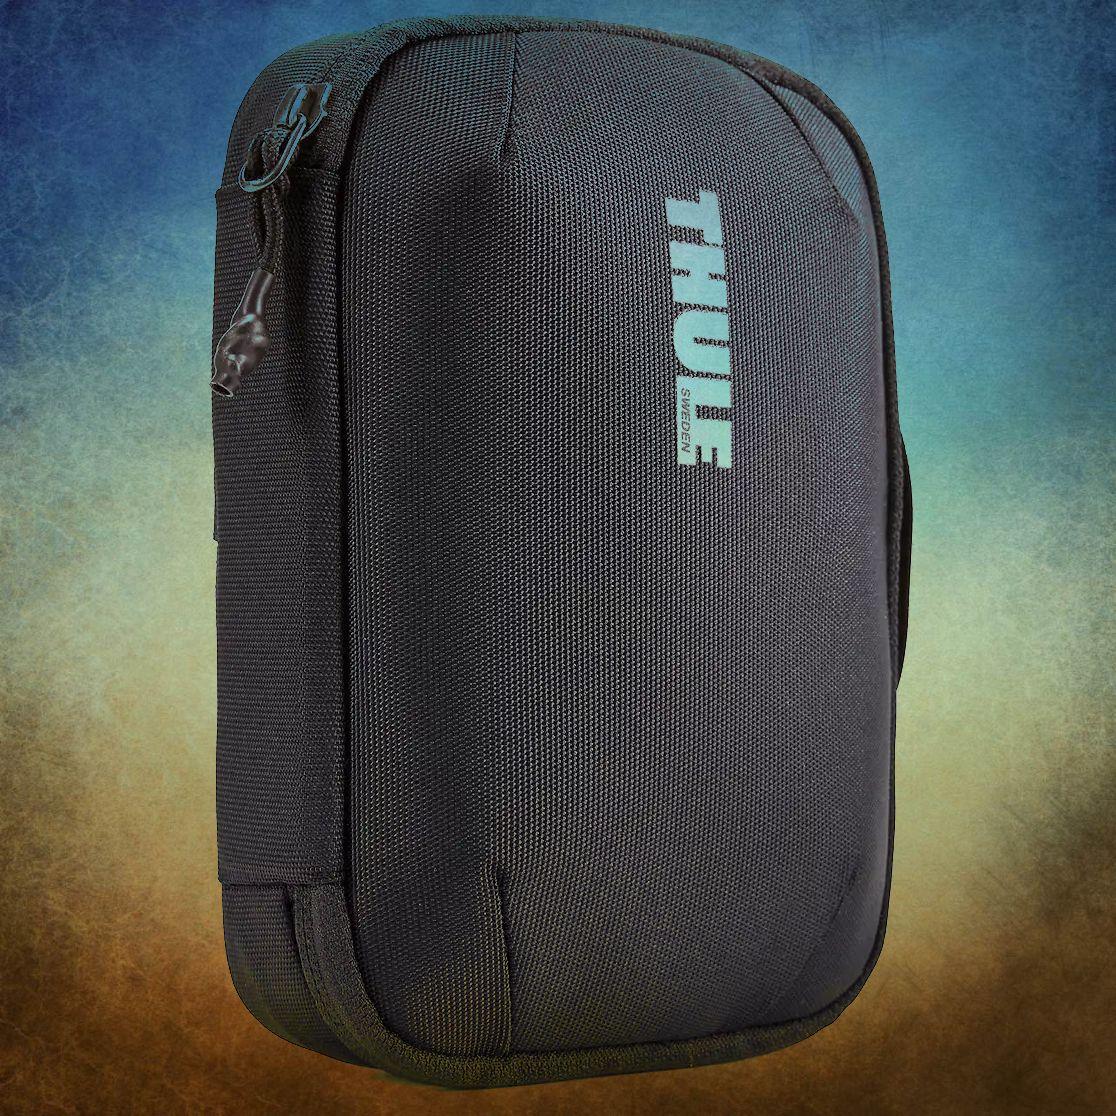 Thule Travel Case for Chargers,Cords & Accessories